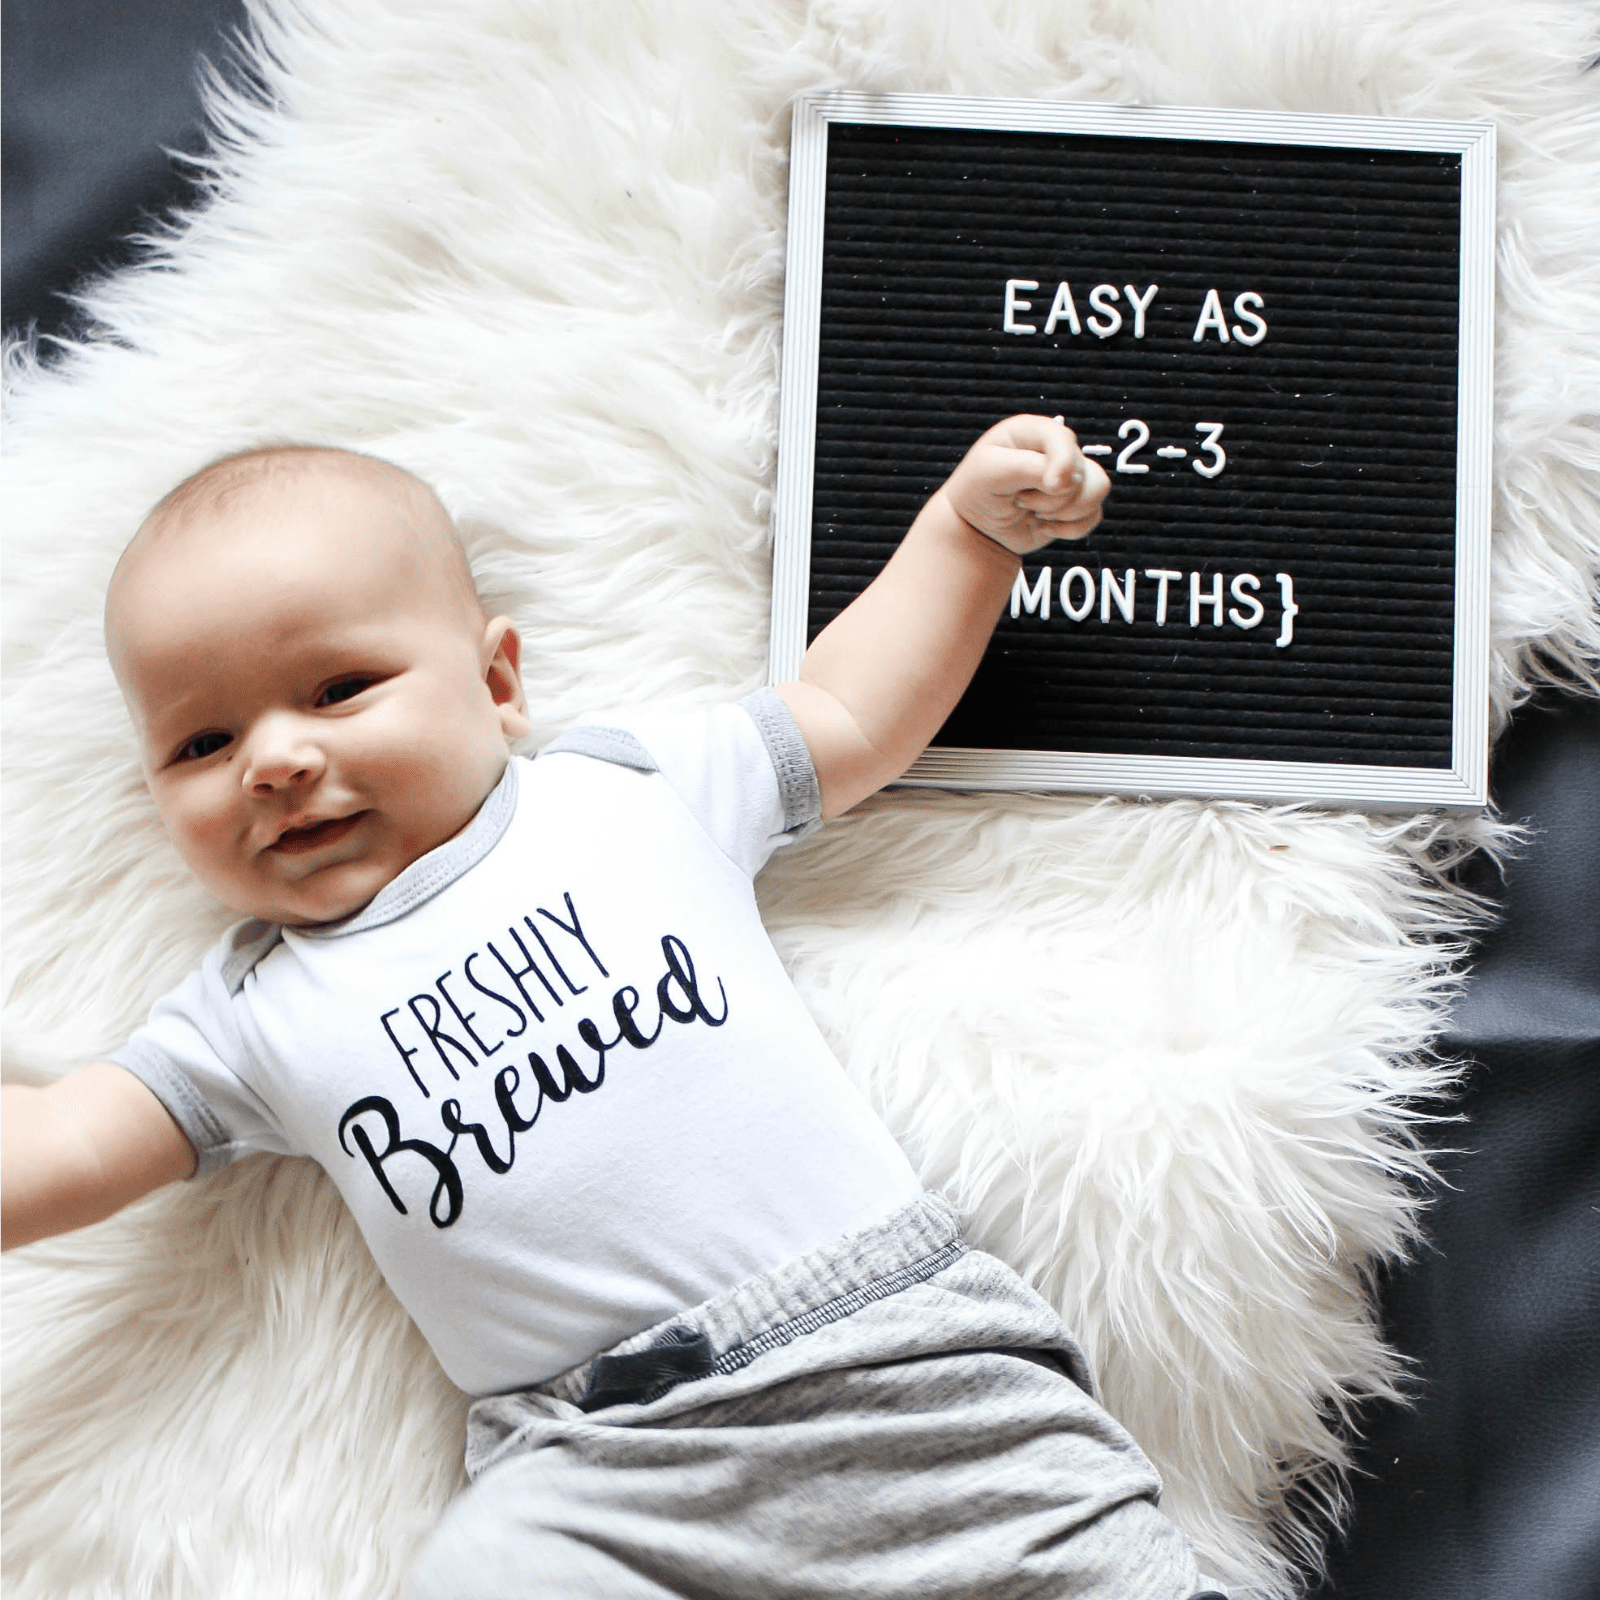 Sharing all of the reasons we are loving August! Including a baby update, a family update, and some renovation plans!